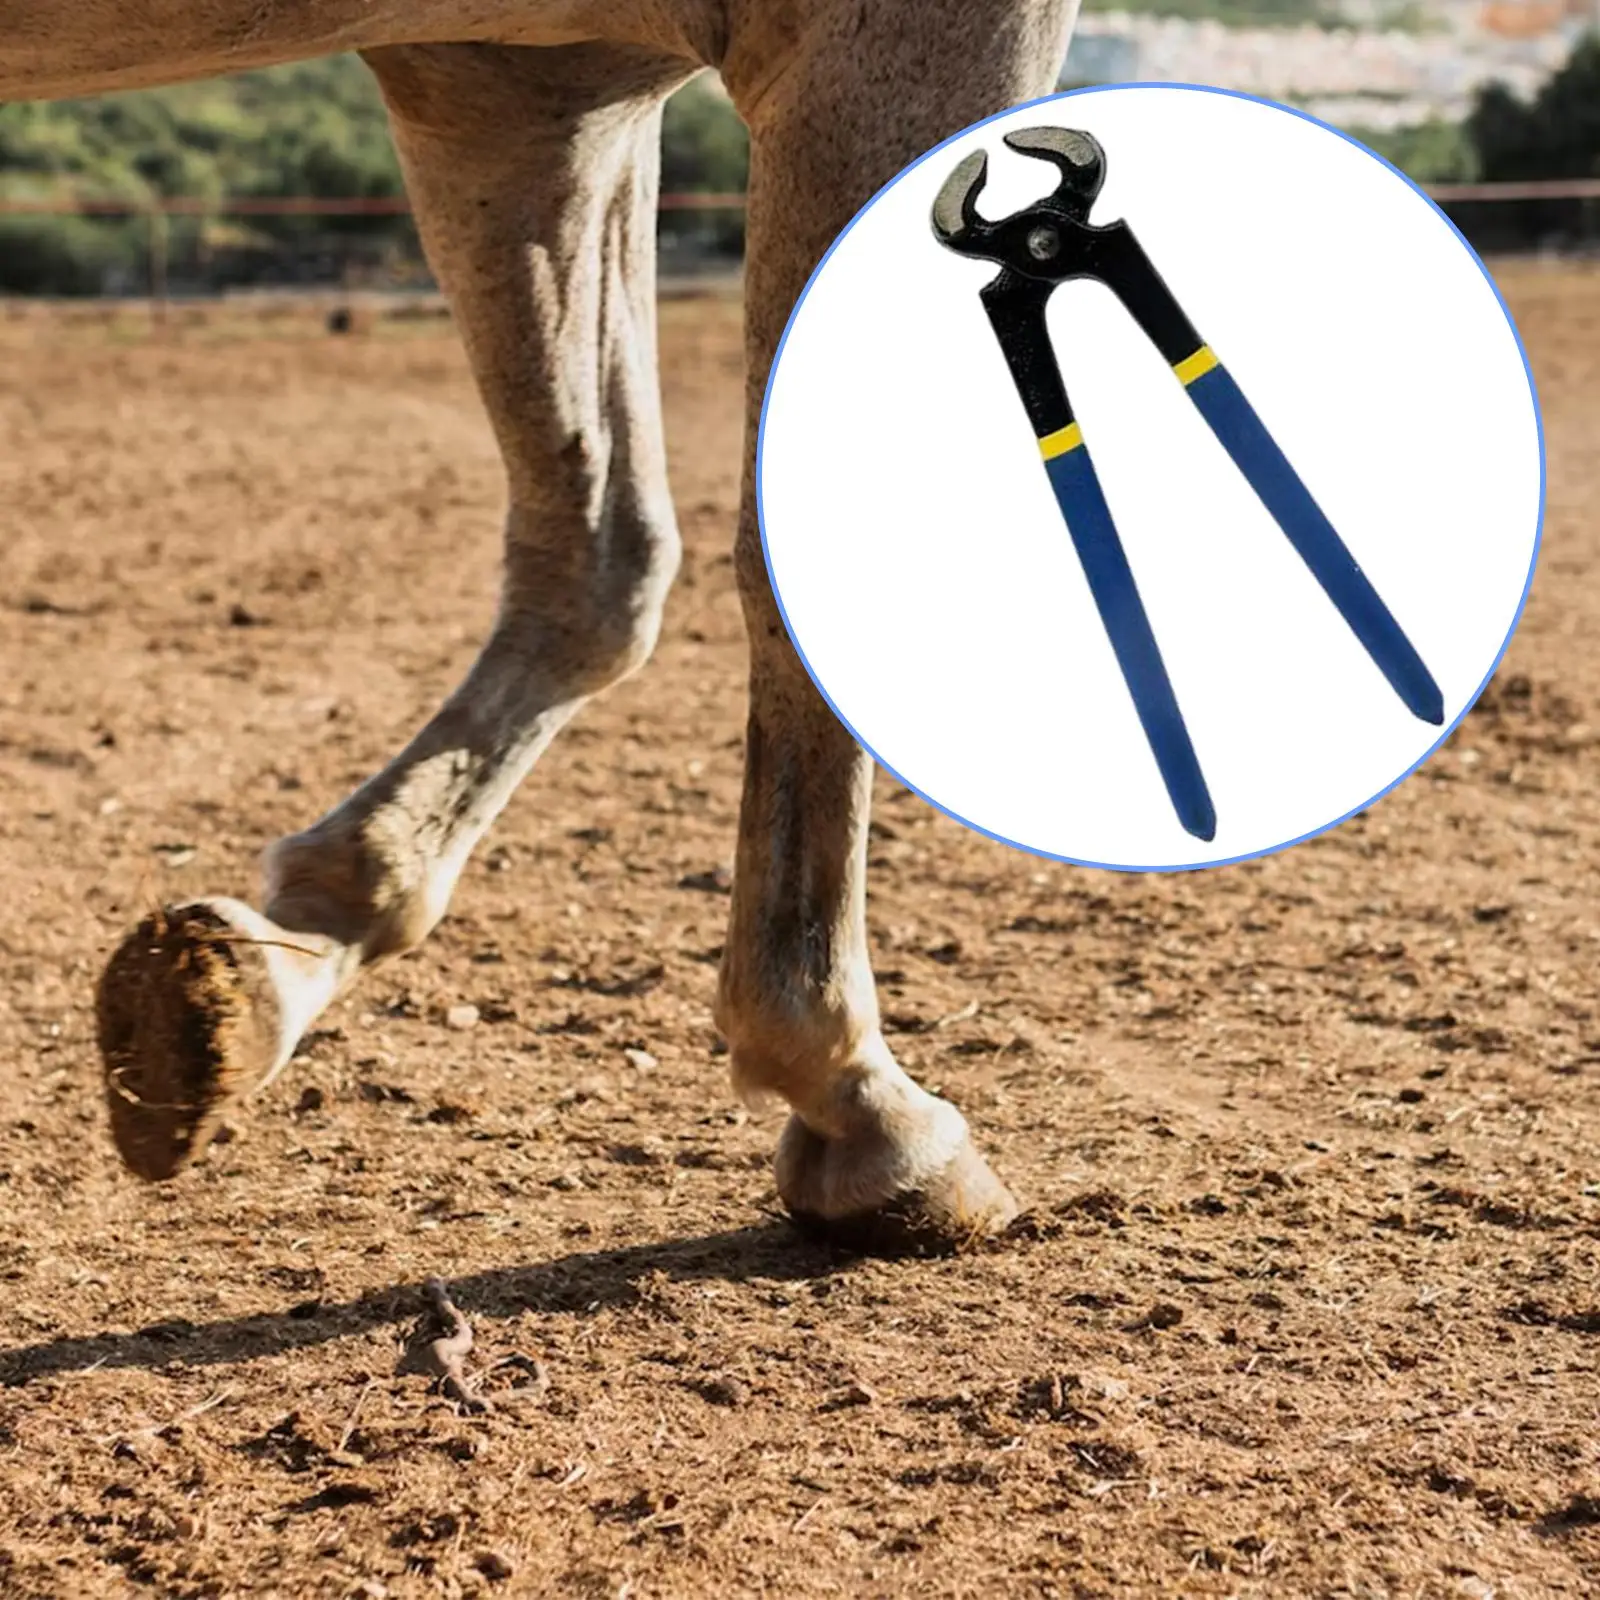 Hoof Trimmer Goat Hoof Trimming Shear Nail Clippers Easy to Use Farrier Nippers Hoof Nippers